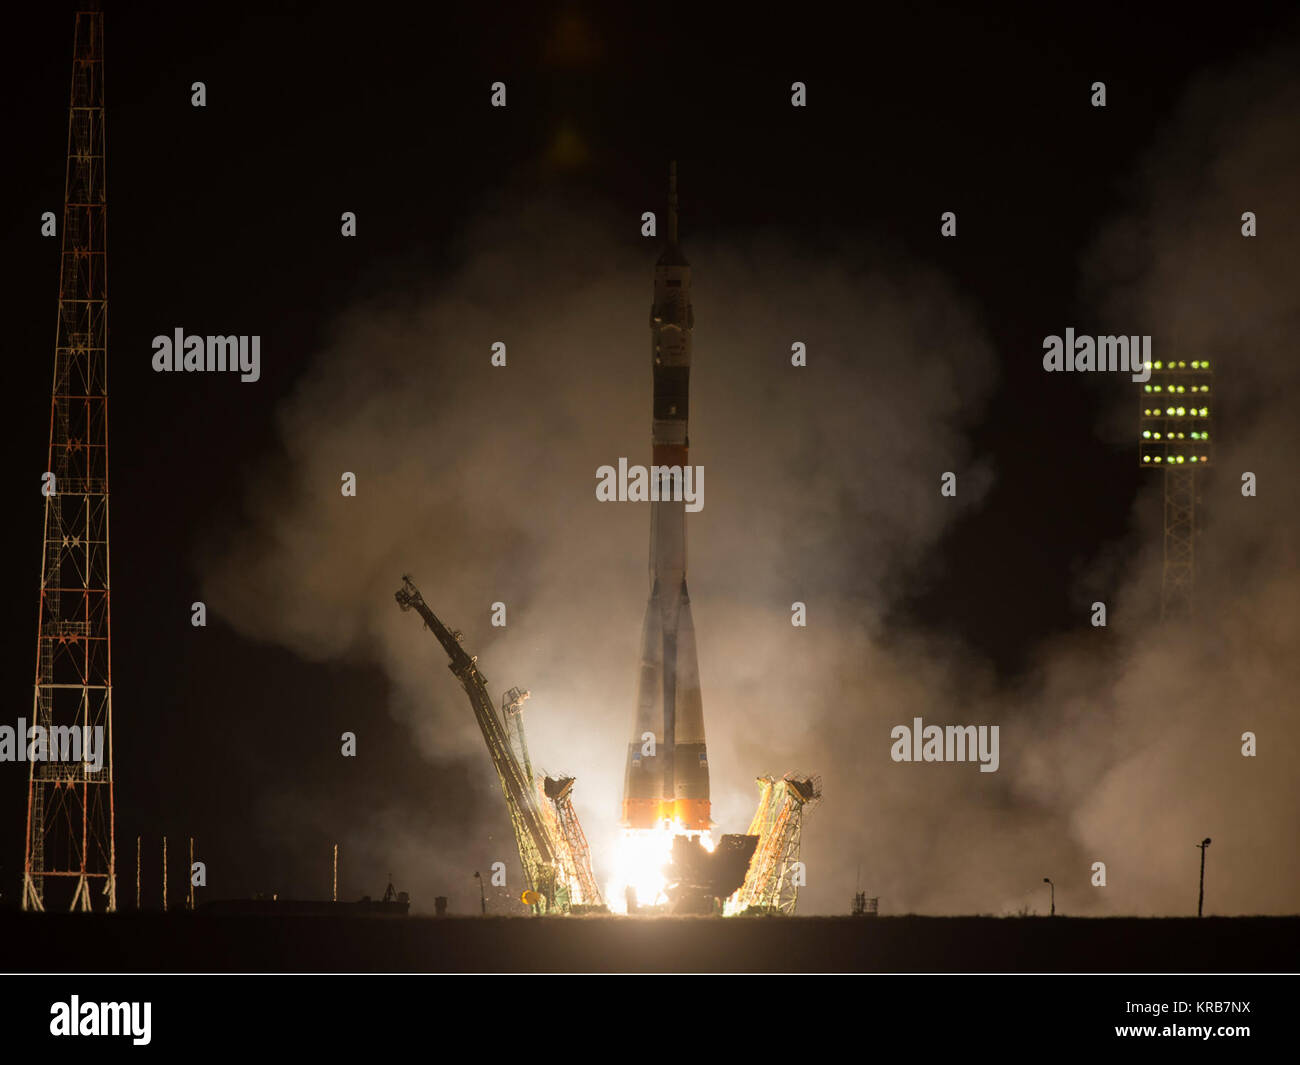 The Soyuz TMA-08M rocket launches from the Baikonur Cosmodrome in Kazakhstan on Friday, March 29, 2013 carrying Expedition 35 Soyuz Commander Pavel Vinogradov,  NASA Flight Engineer Chris Cassidy and Russian Flight Engineer Alexander Misurkin to the International Space Station.  Their Soyuz rocket launched at 2:43 a.m. local time.  Photo Credit: (NASA/Carla Cioffi) Expedition 35 Launch Stock Photo